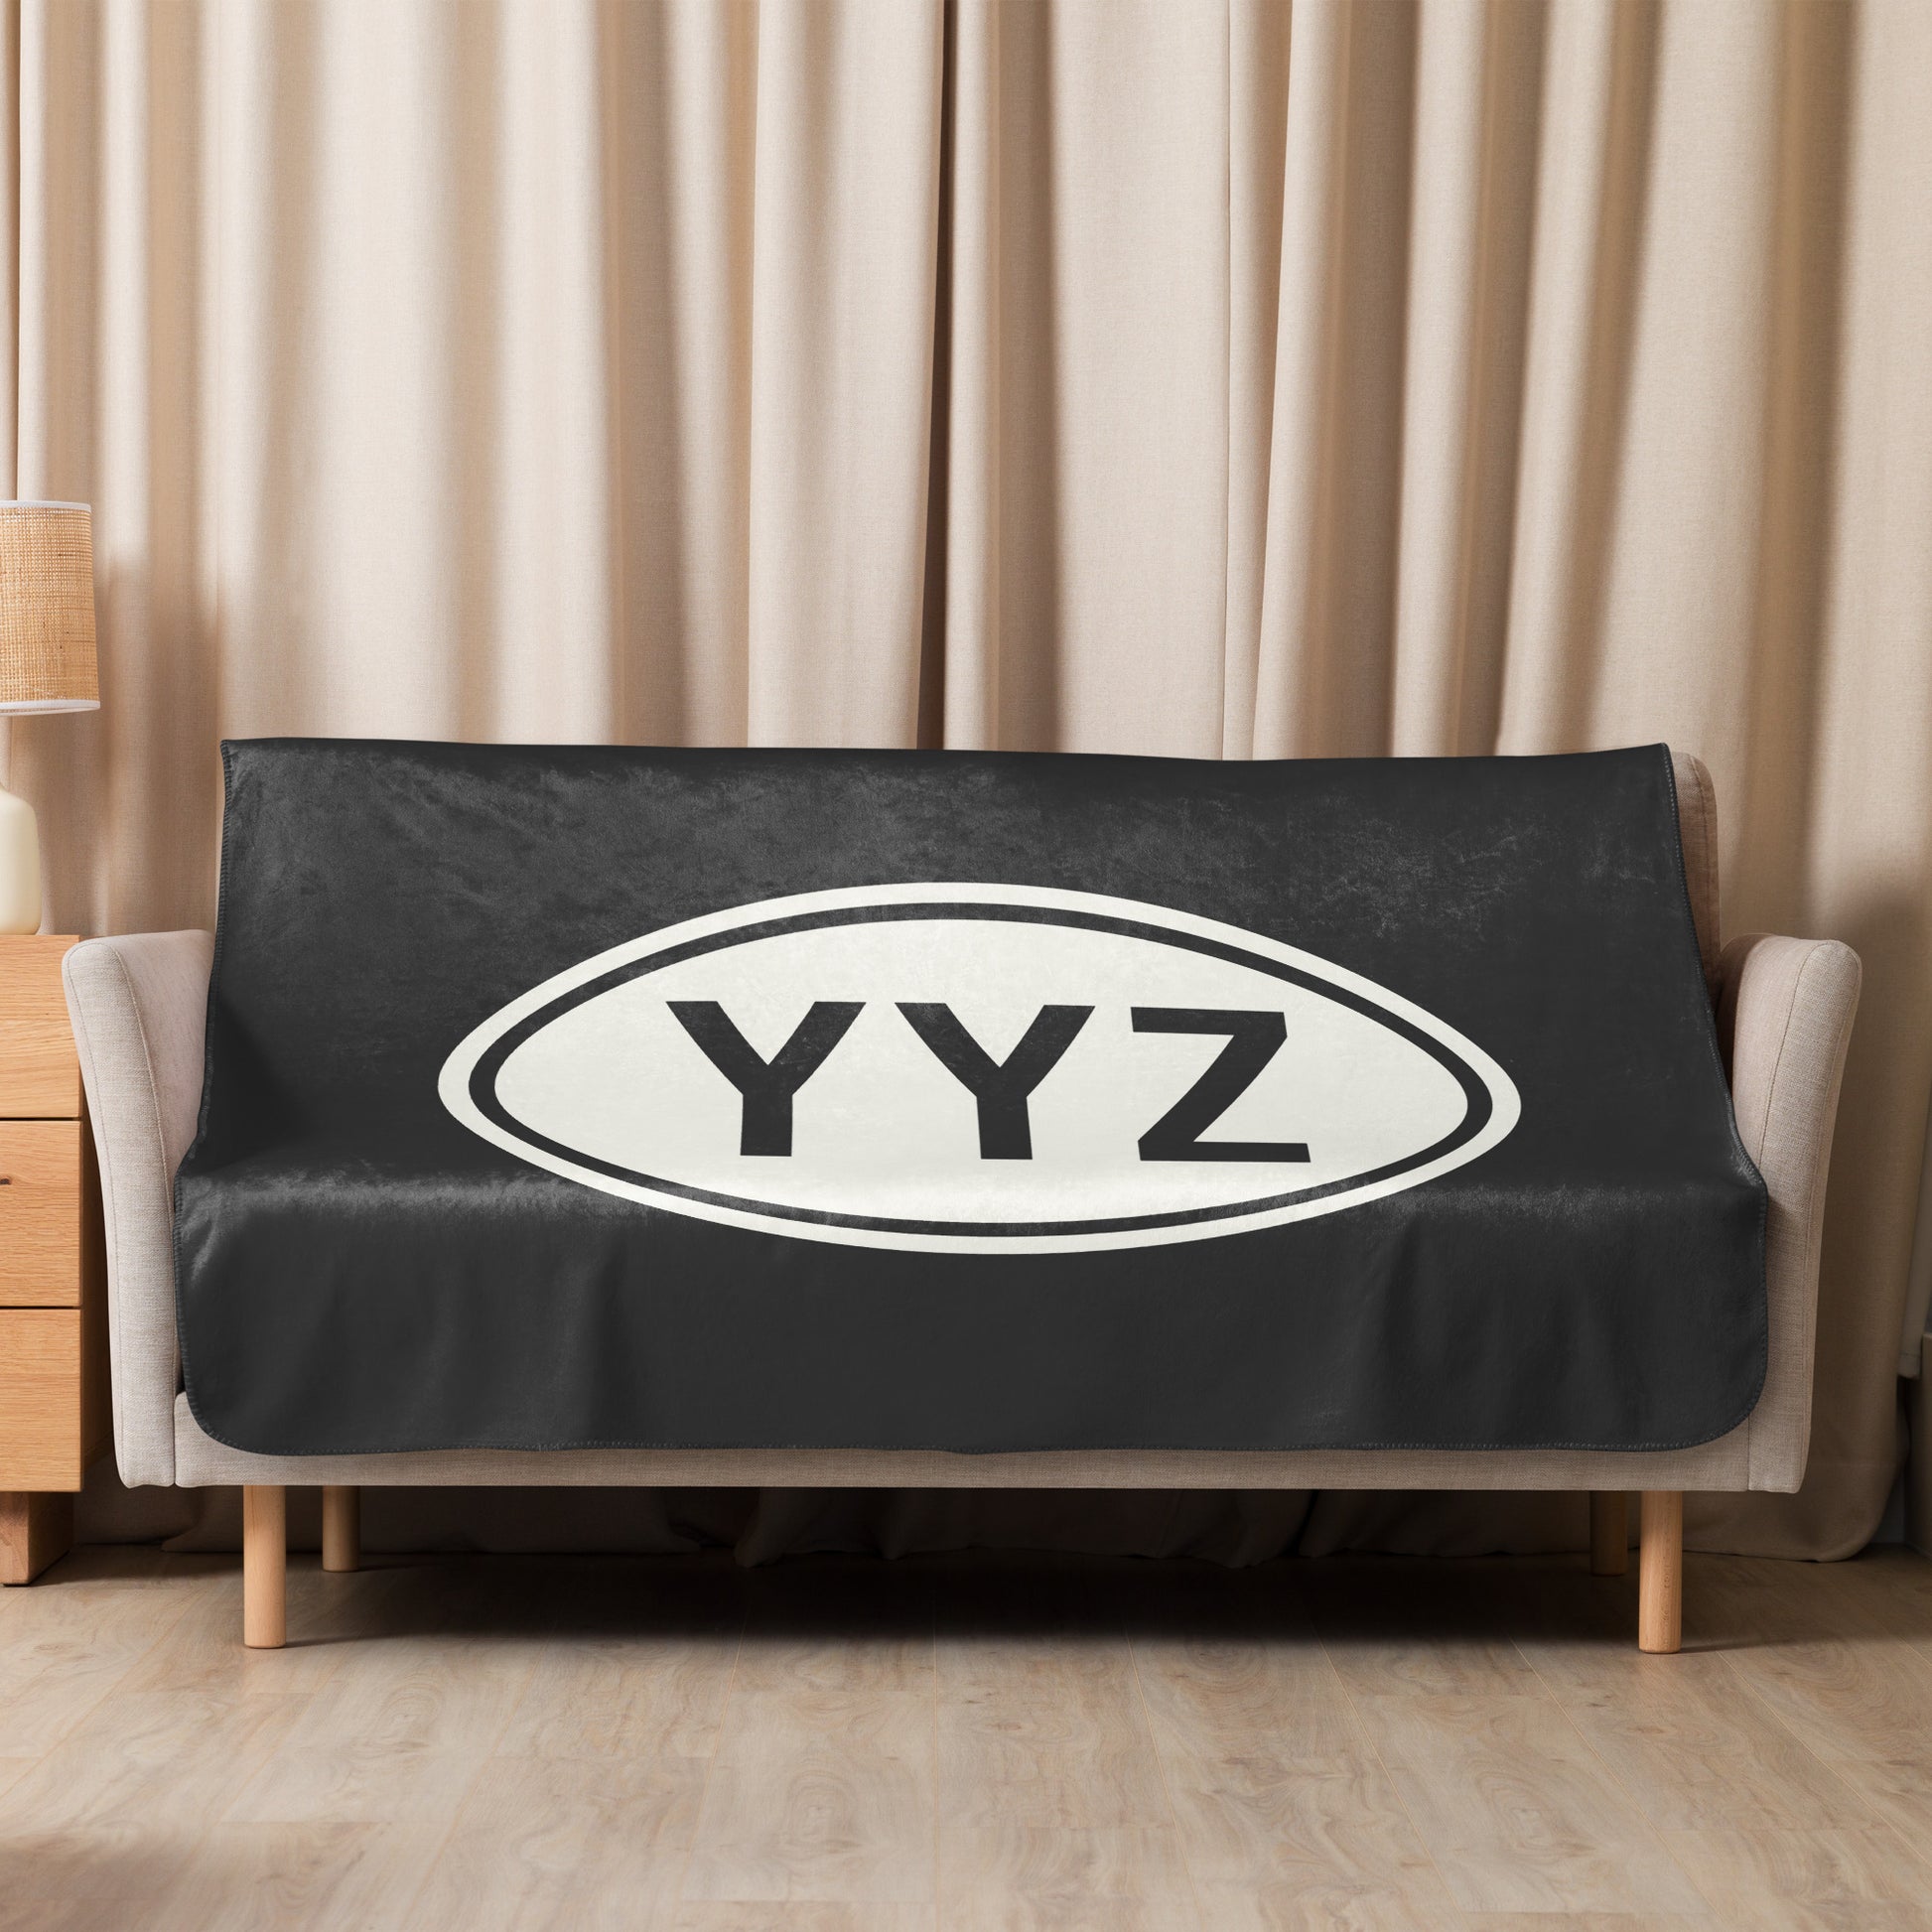 Unique Travel Gift Sherpa Blanket - White Oval • YYZ Toronto • YHM Designs - Image 07